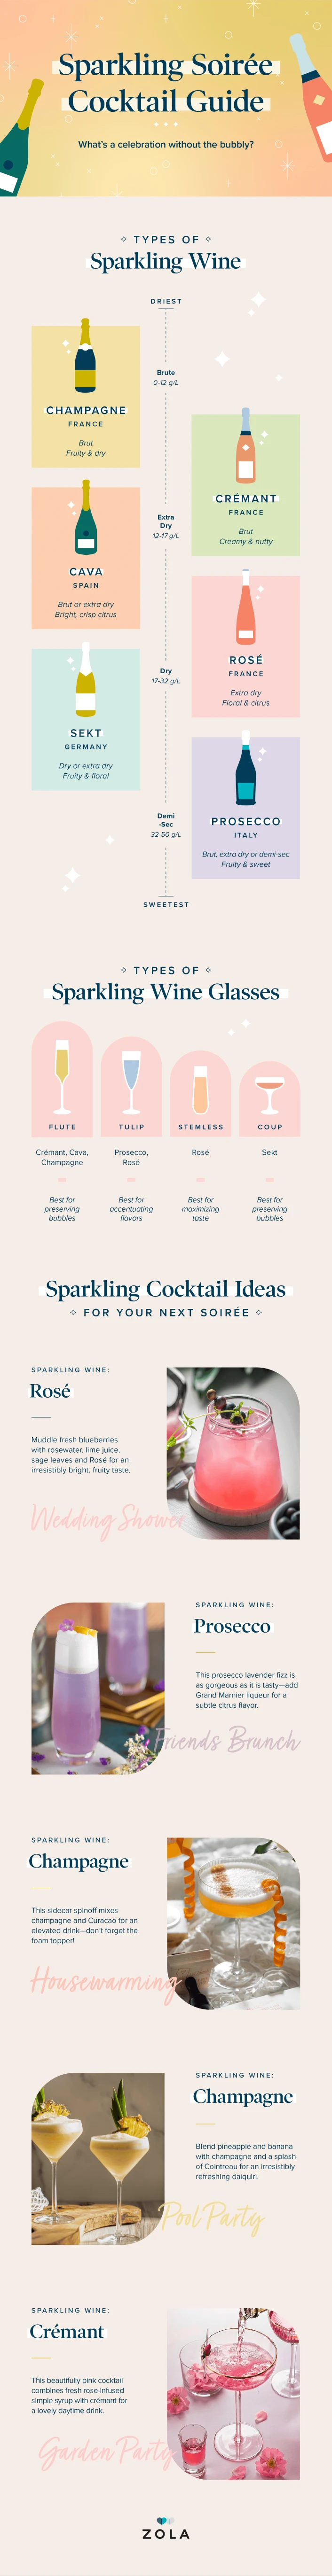 Infographic of cocktail guide with different types of wine